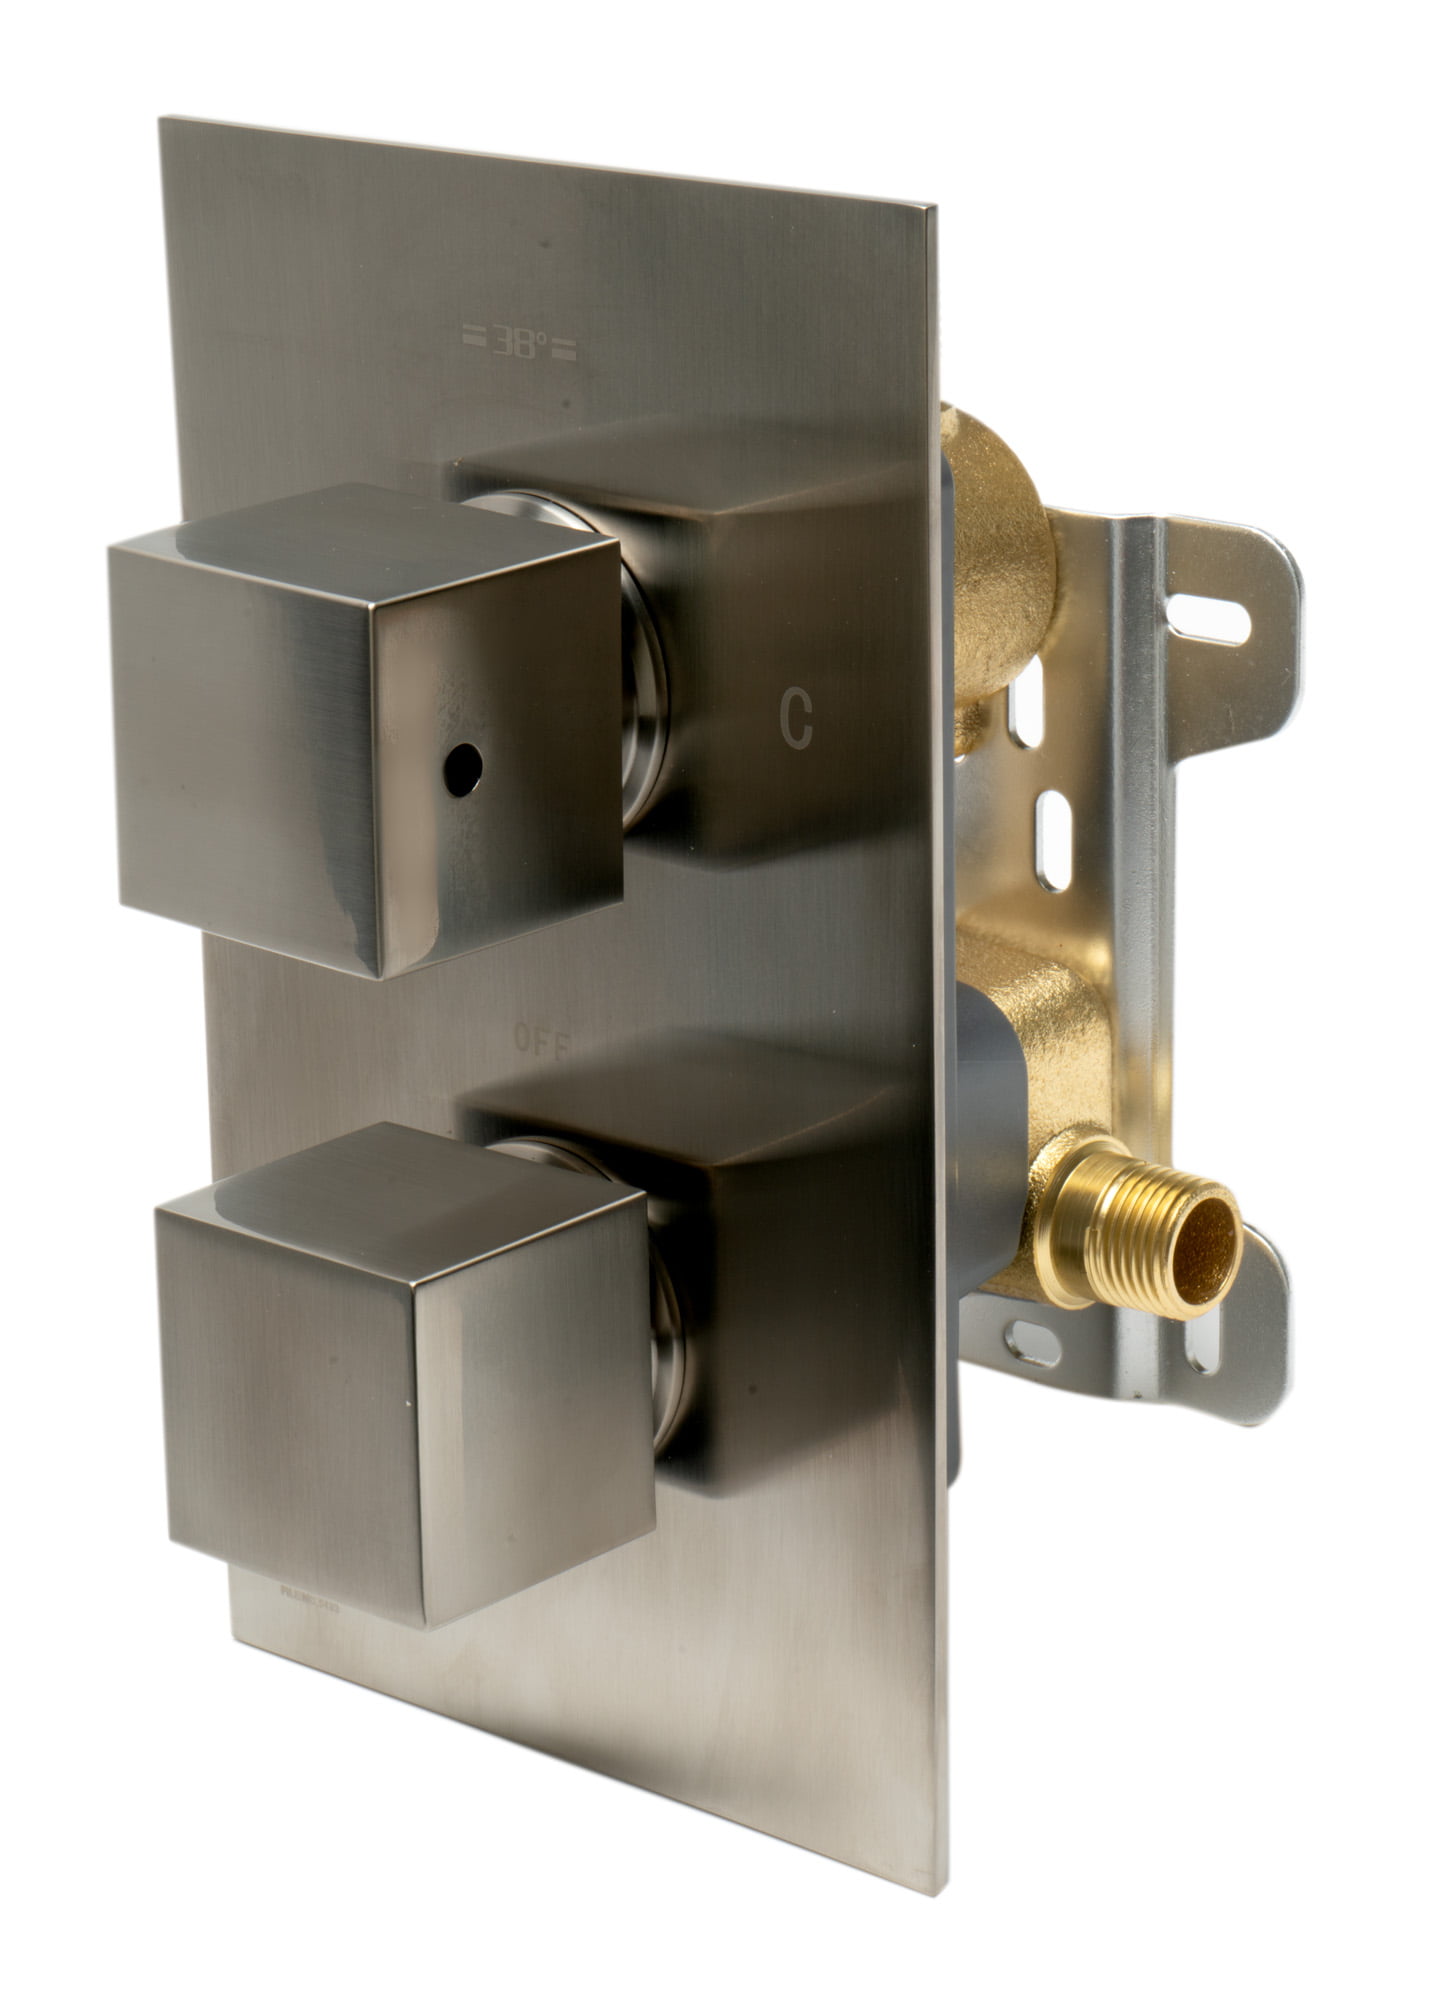 Ab2601-bn Square Knob 1 Way Thermostatic Shower Mixer - Brushed Nickel